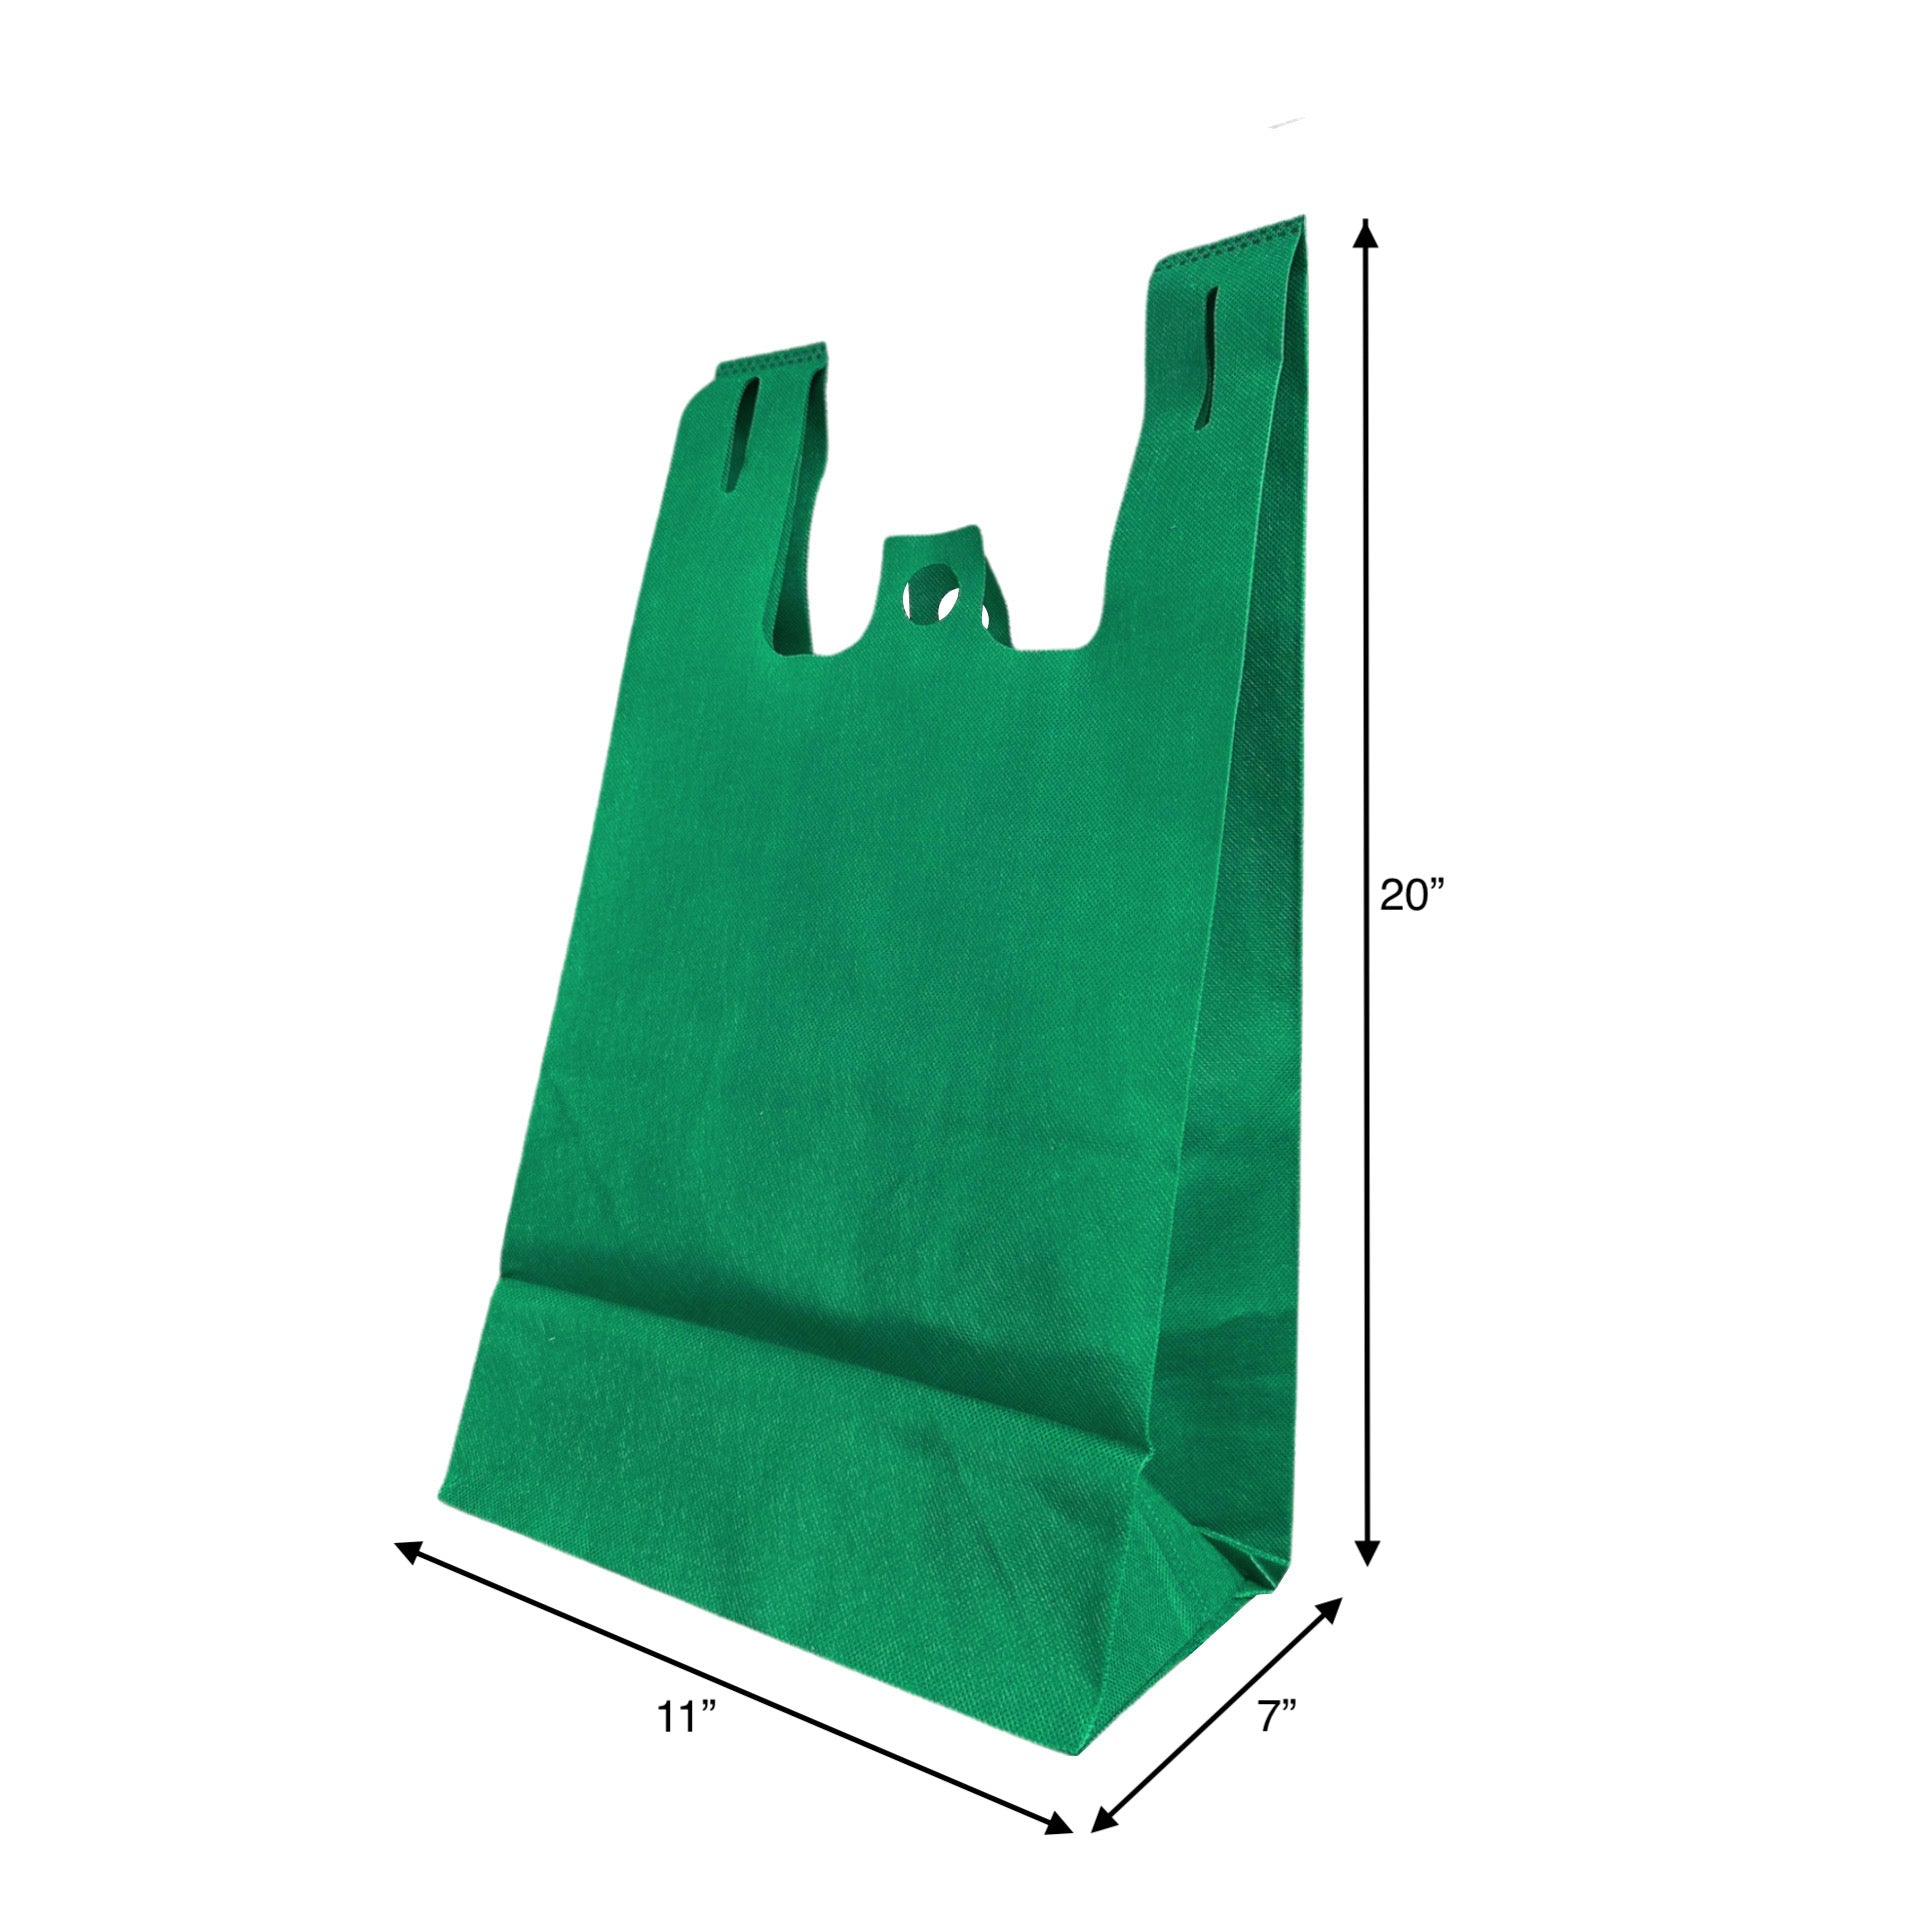 200pcs, T-Shirt Bag, 11x7x20x7 inches, Dark Green Non-Woven Reusable Shopping Bags, with Square Bottom